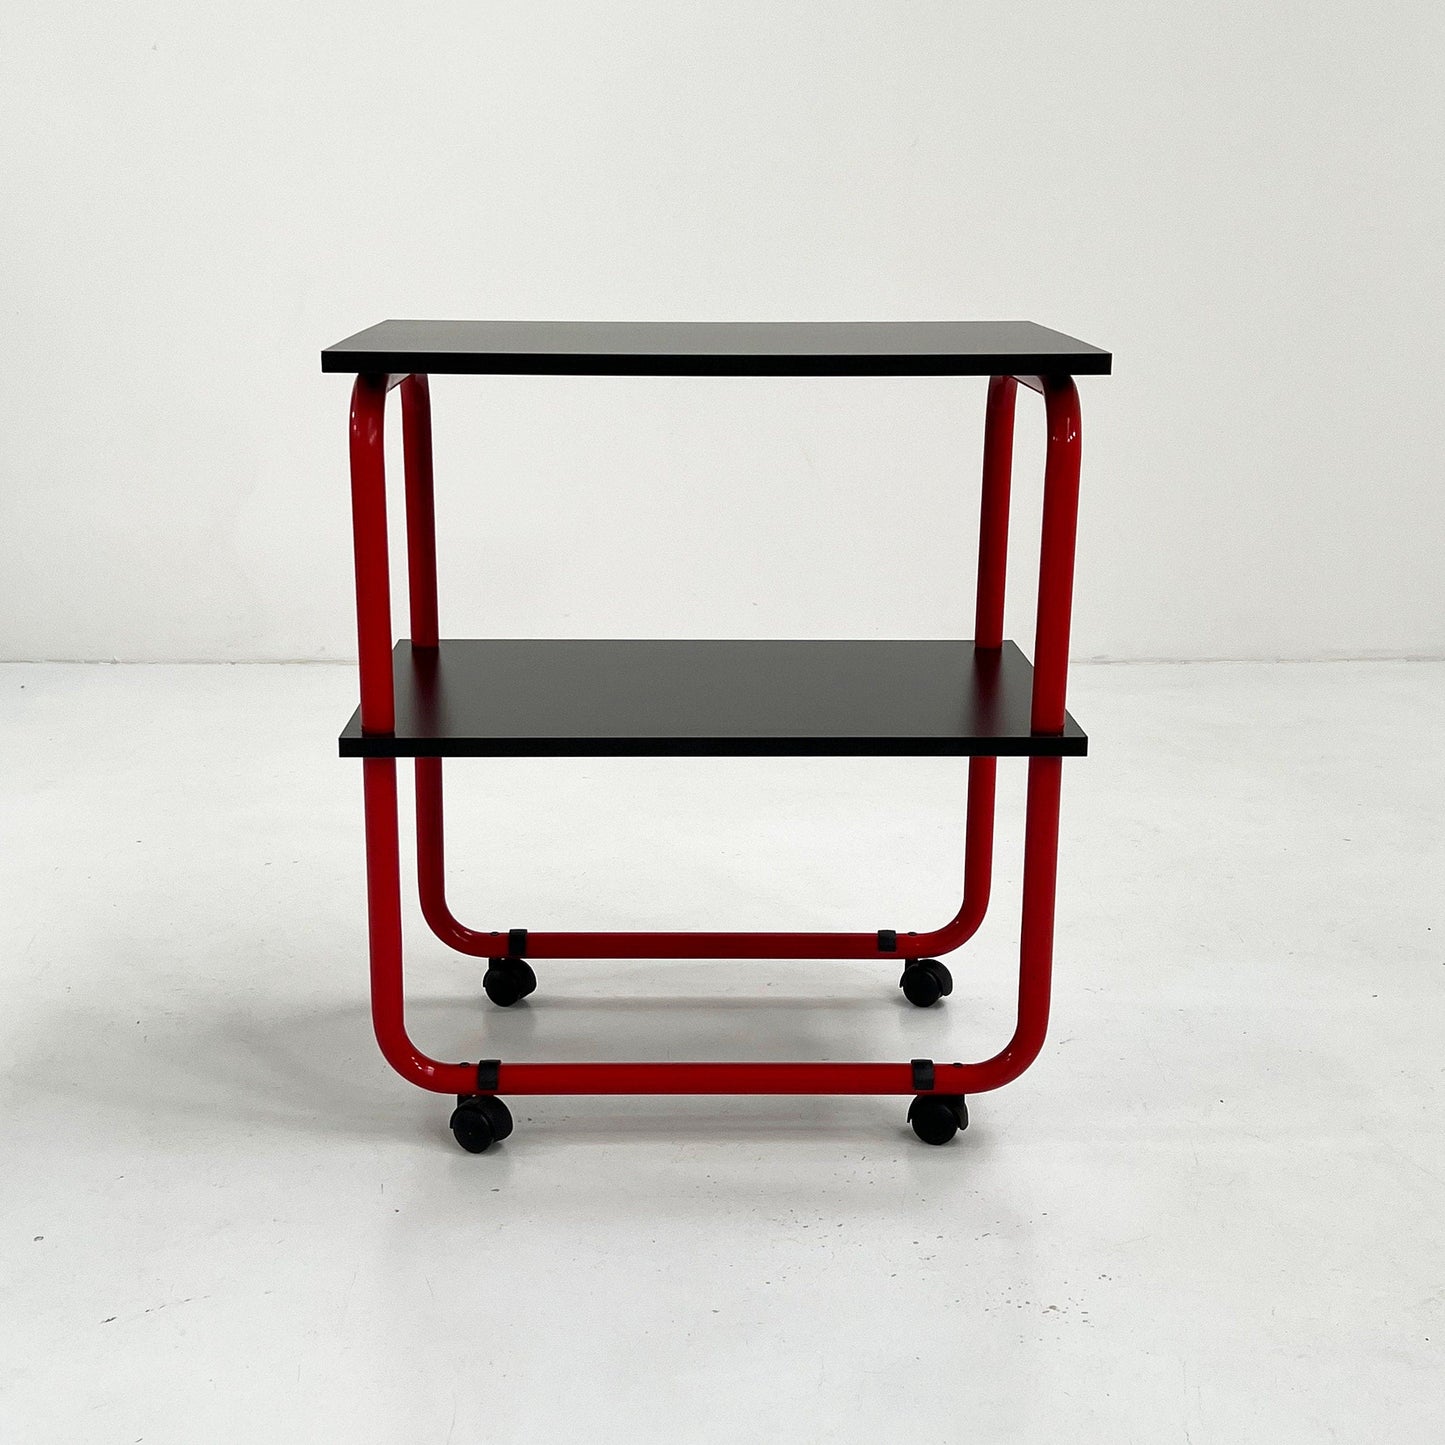 Tubular console table / wall table on wheels in metal and wood, 1980s vintage